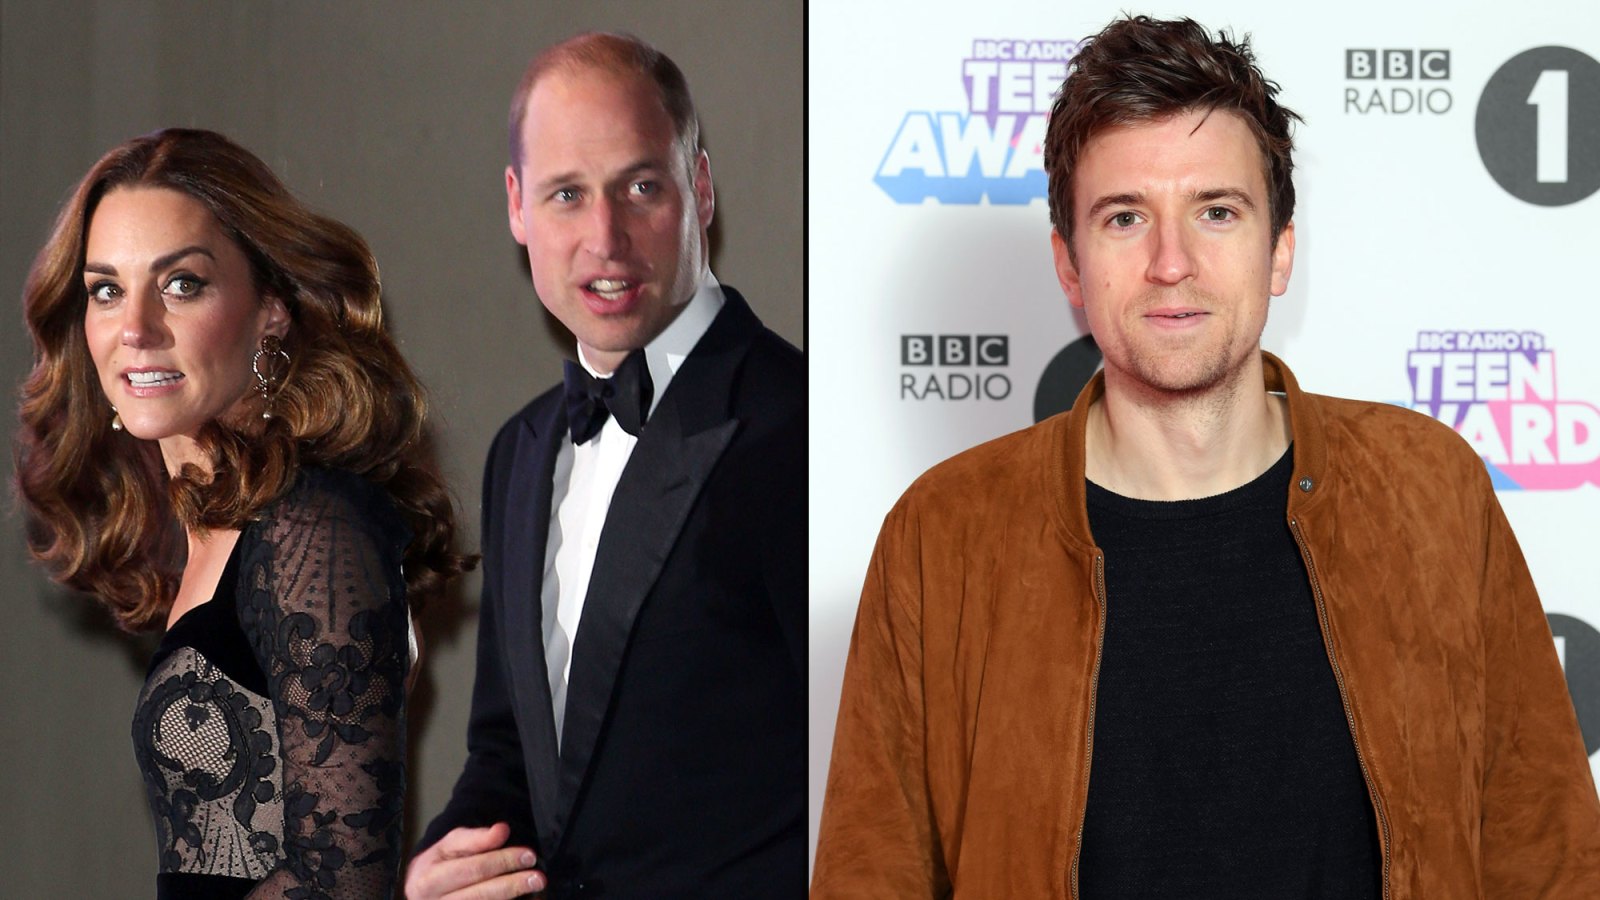 Prince William and Duchess Kate Talked to BBC Host Greg James After He Made a Joke About Princess Charlotte